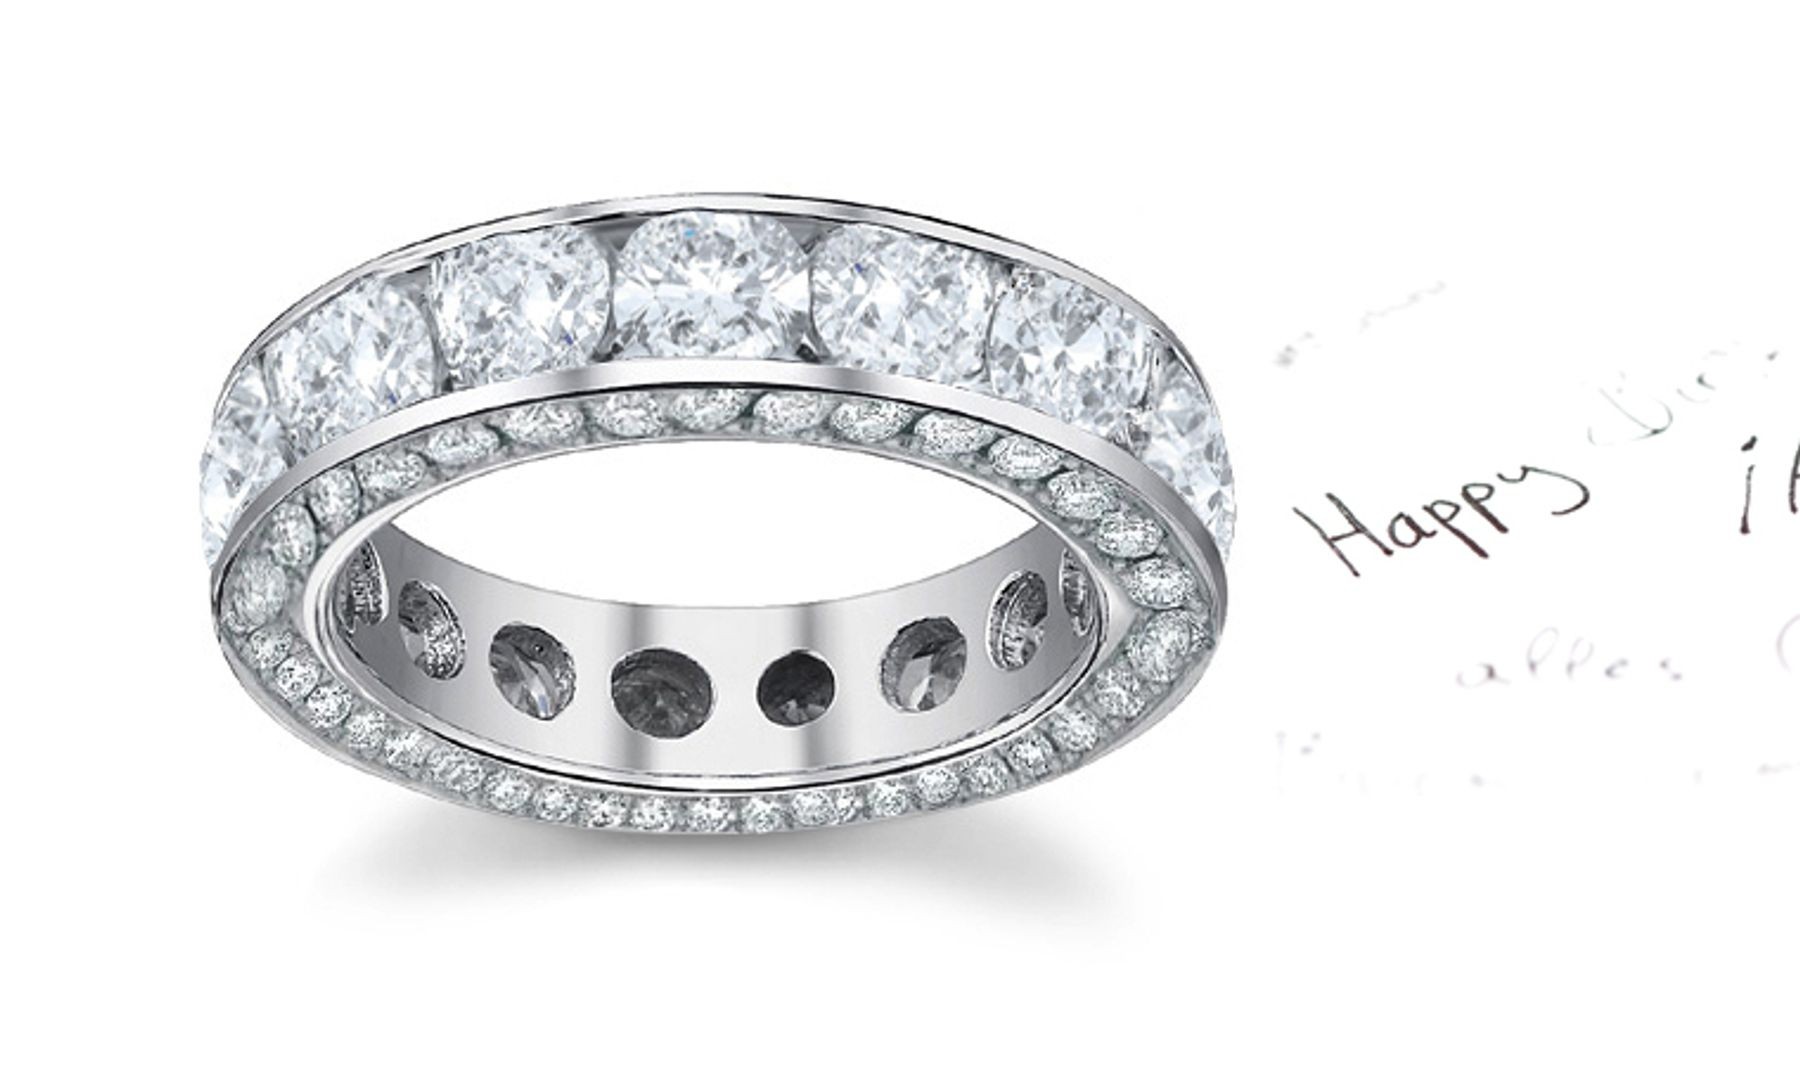 Twinkling Round Diamond Eternity Band with Sides Diamond Sprinkled